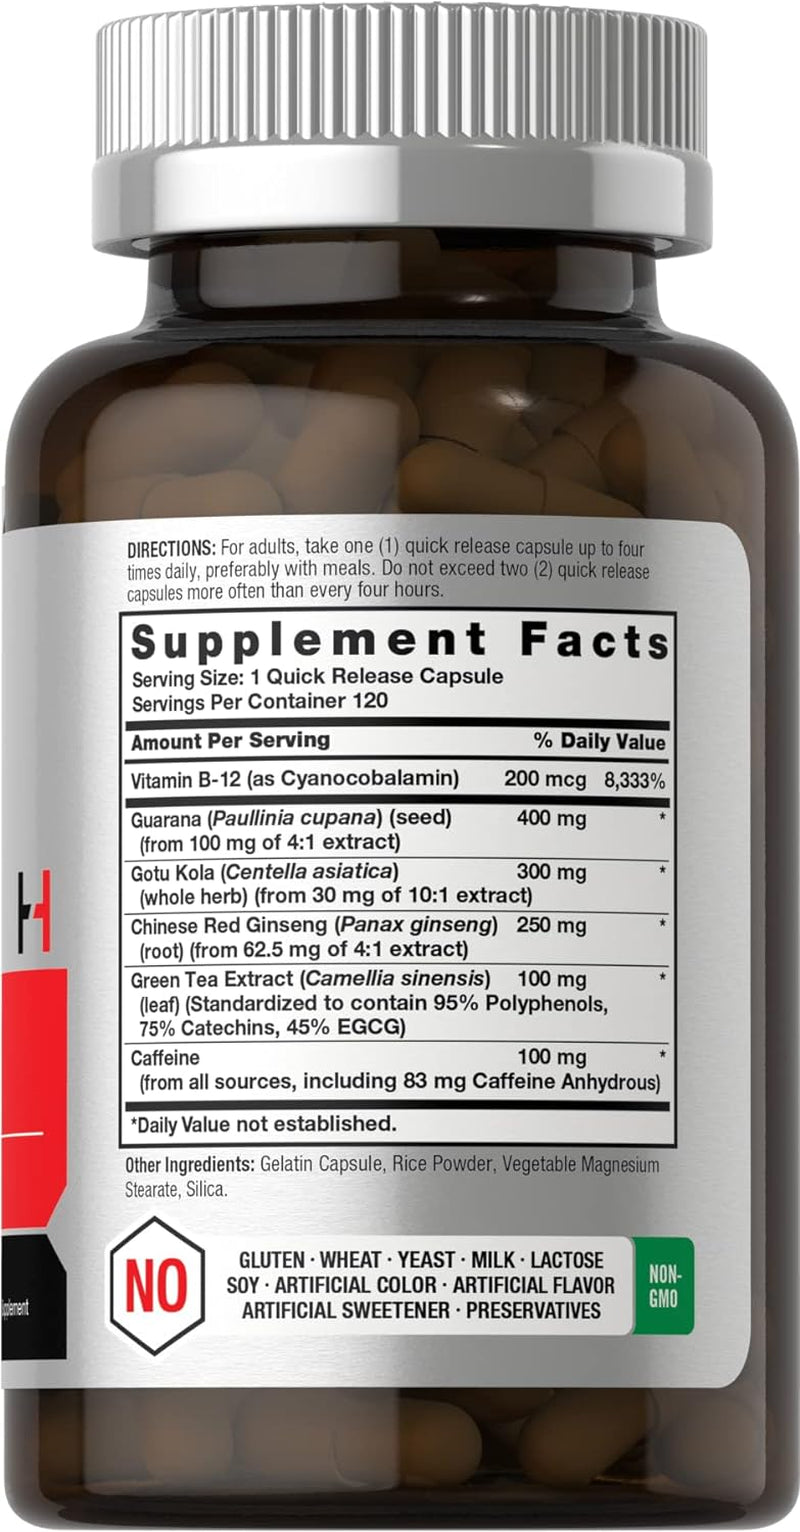 Ultra Energy Supplement | 120 Capsule Pills | with Caffeine & Vitamin B12 | Daily Energy Booster | Non-Gmo, Gluten Free | by Horbaach